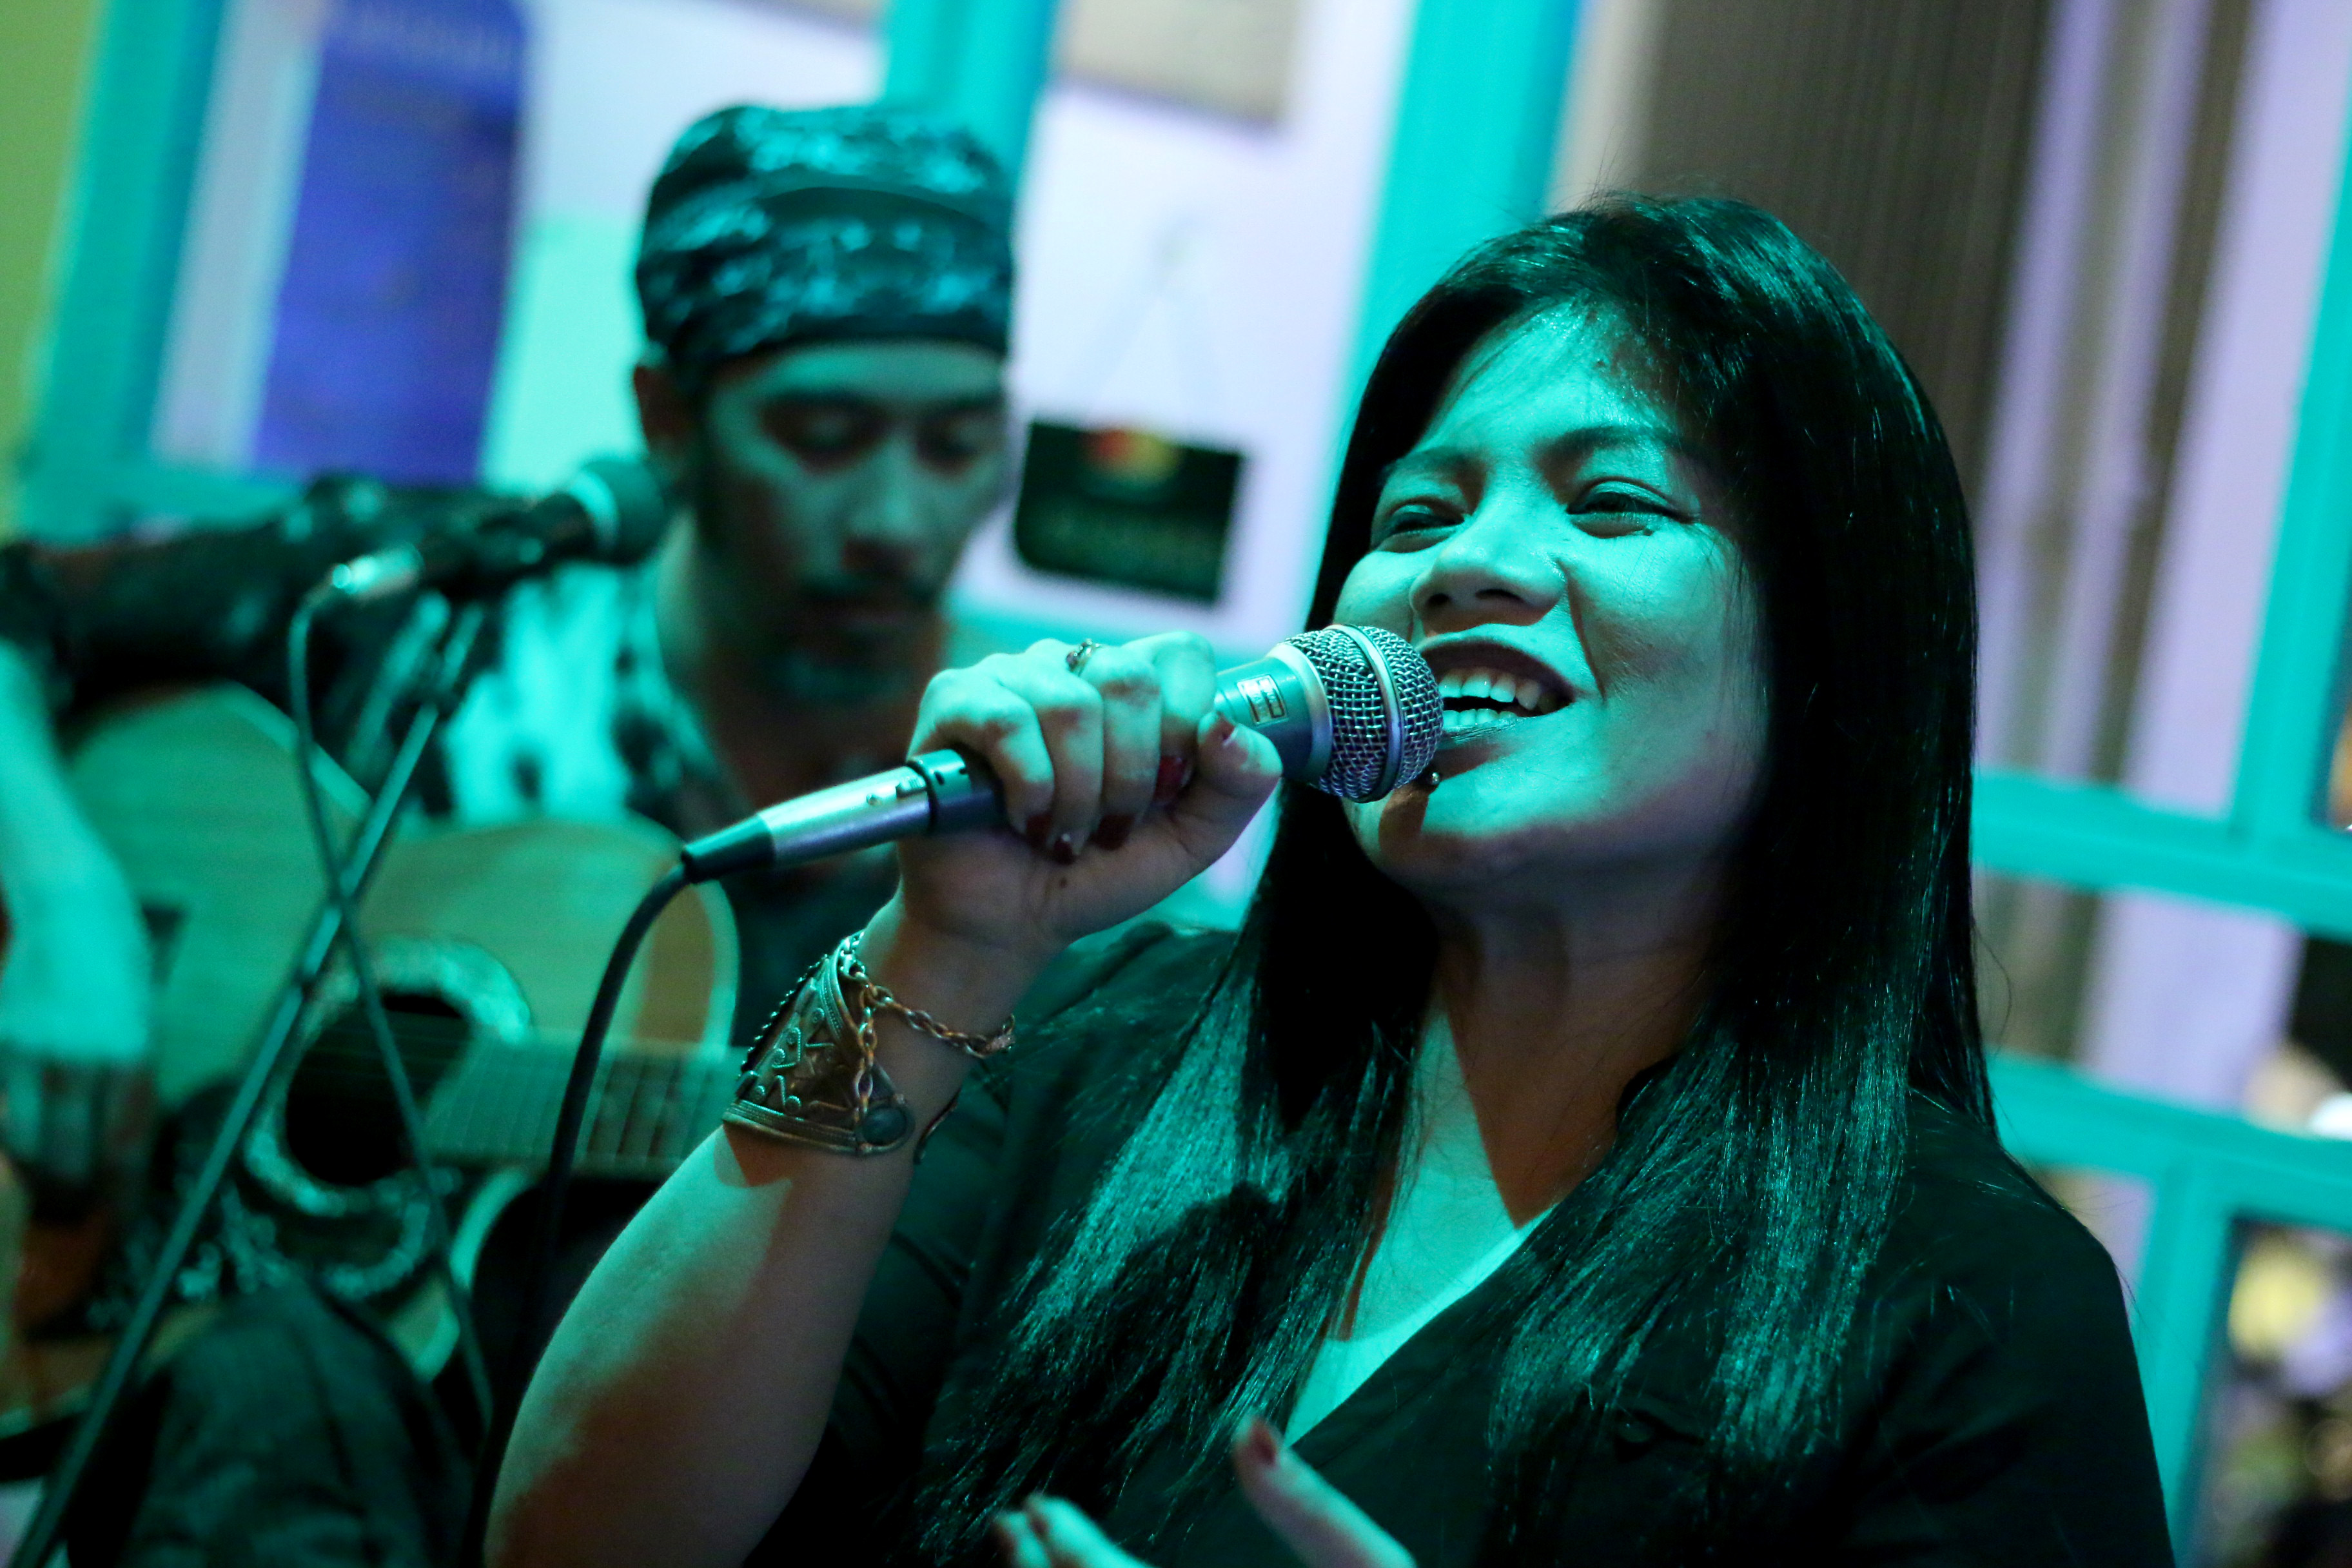 Amor Garcia is seen performing at a bar in Ho Chi Minh City's District 1. Photo: Tuoi Tre